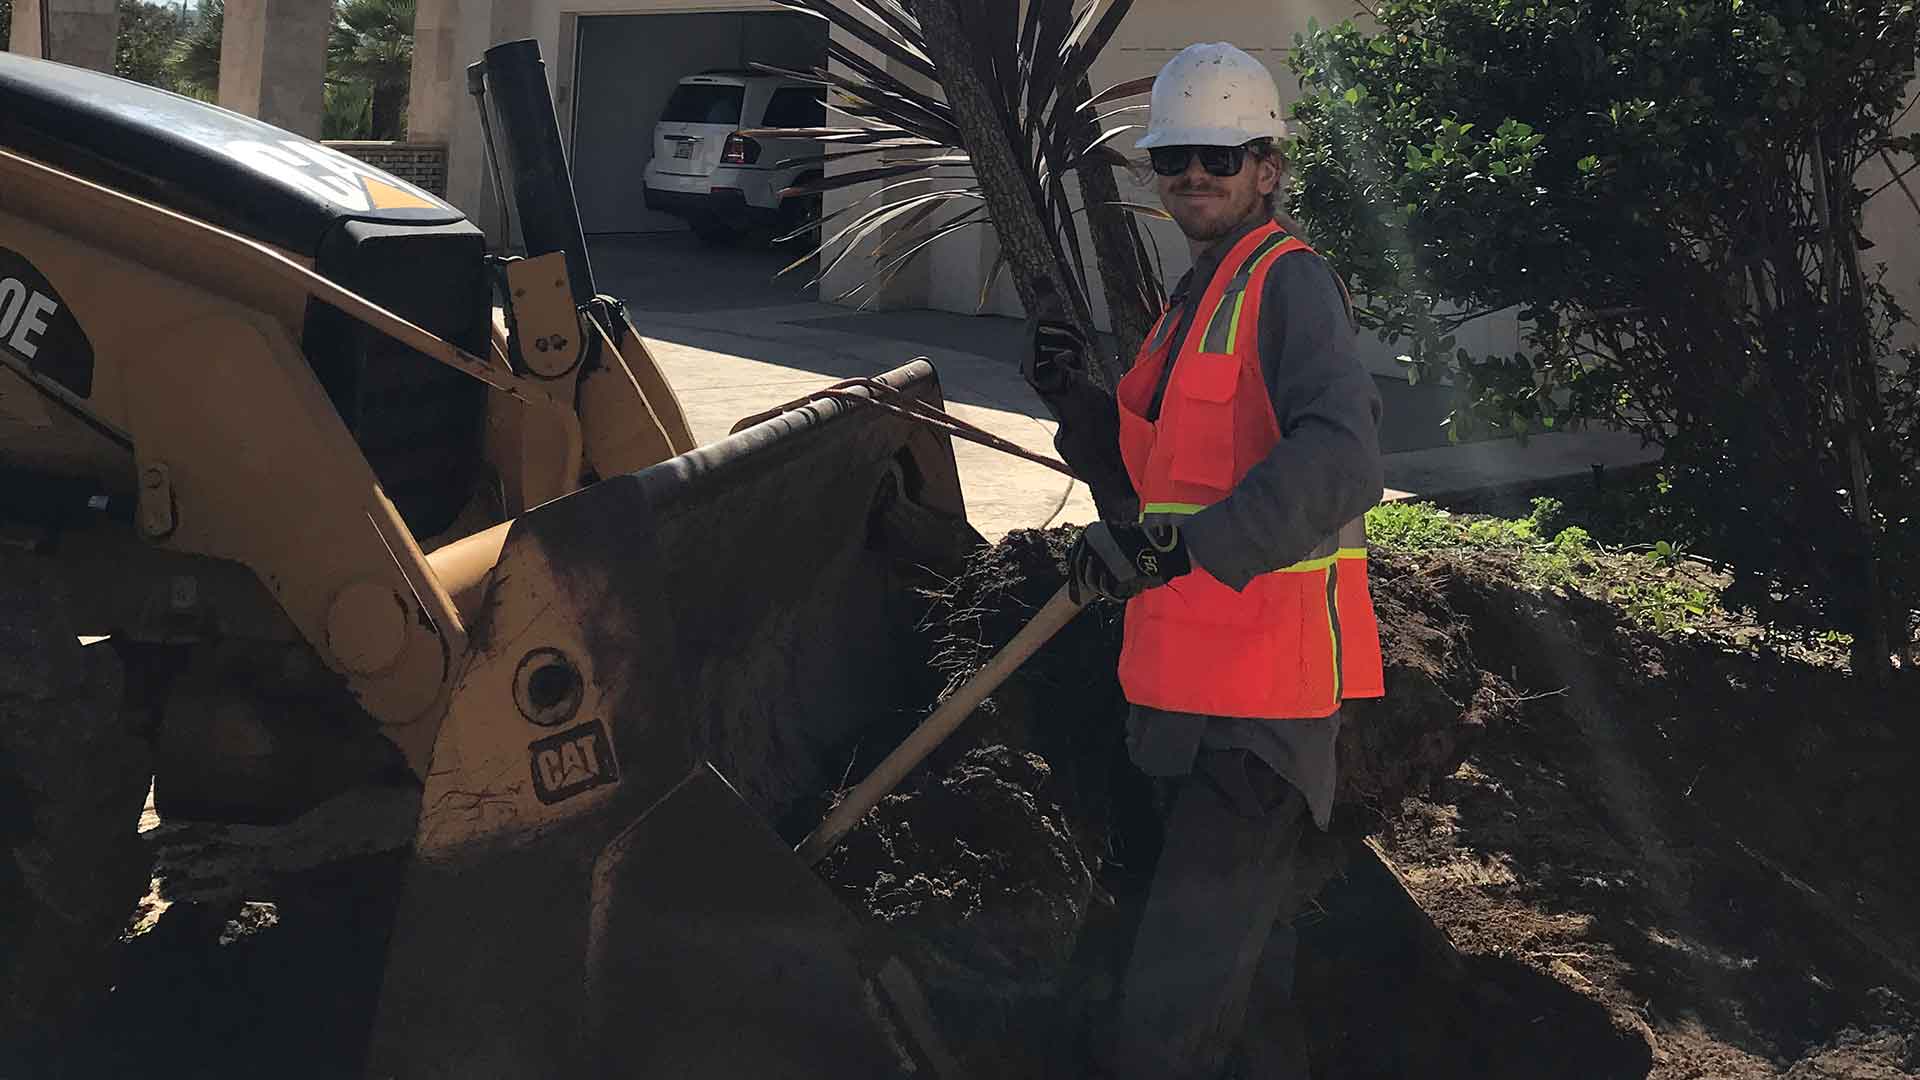 Employee working at a chipper to cut up tree branches in Rancho Santa Fe, CA.